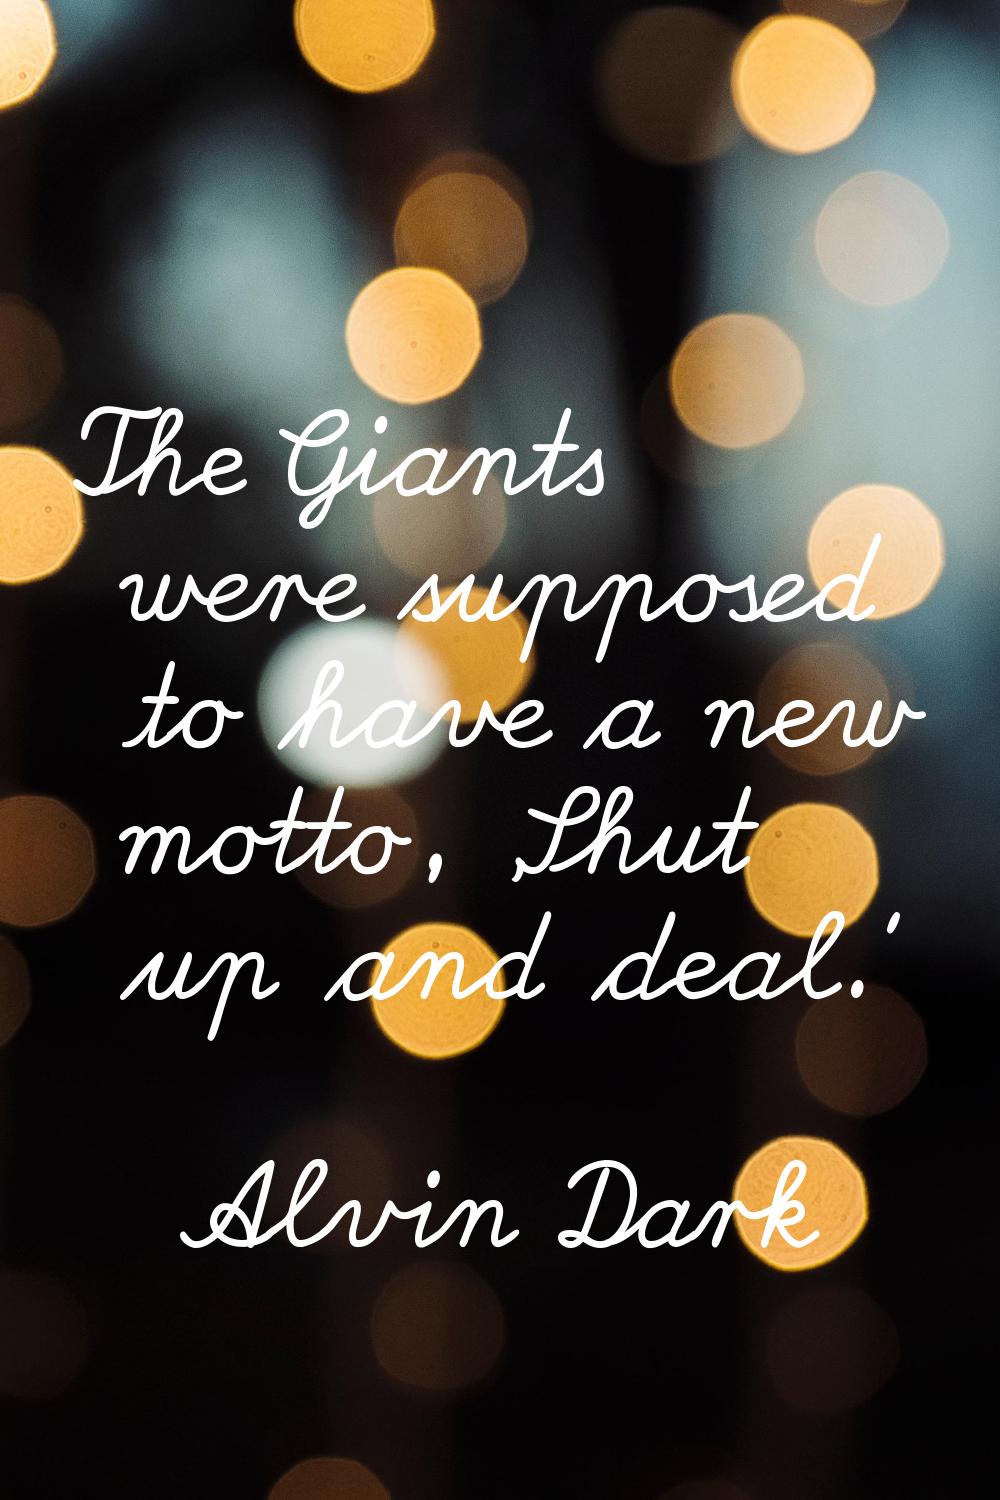 The Giants were supposed to have a new motto, 'Shut up and deal.'